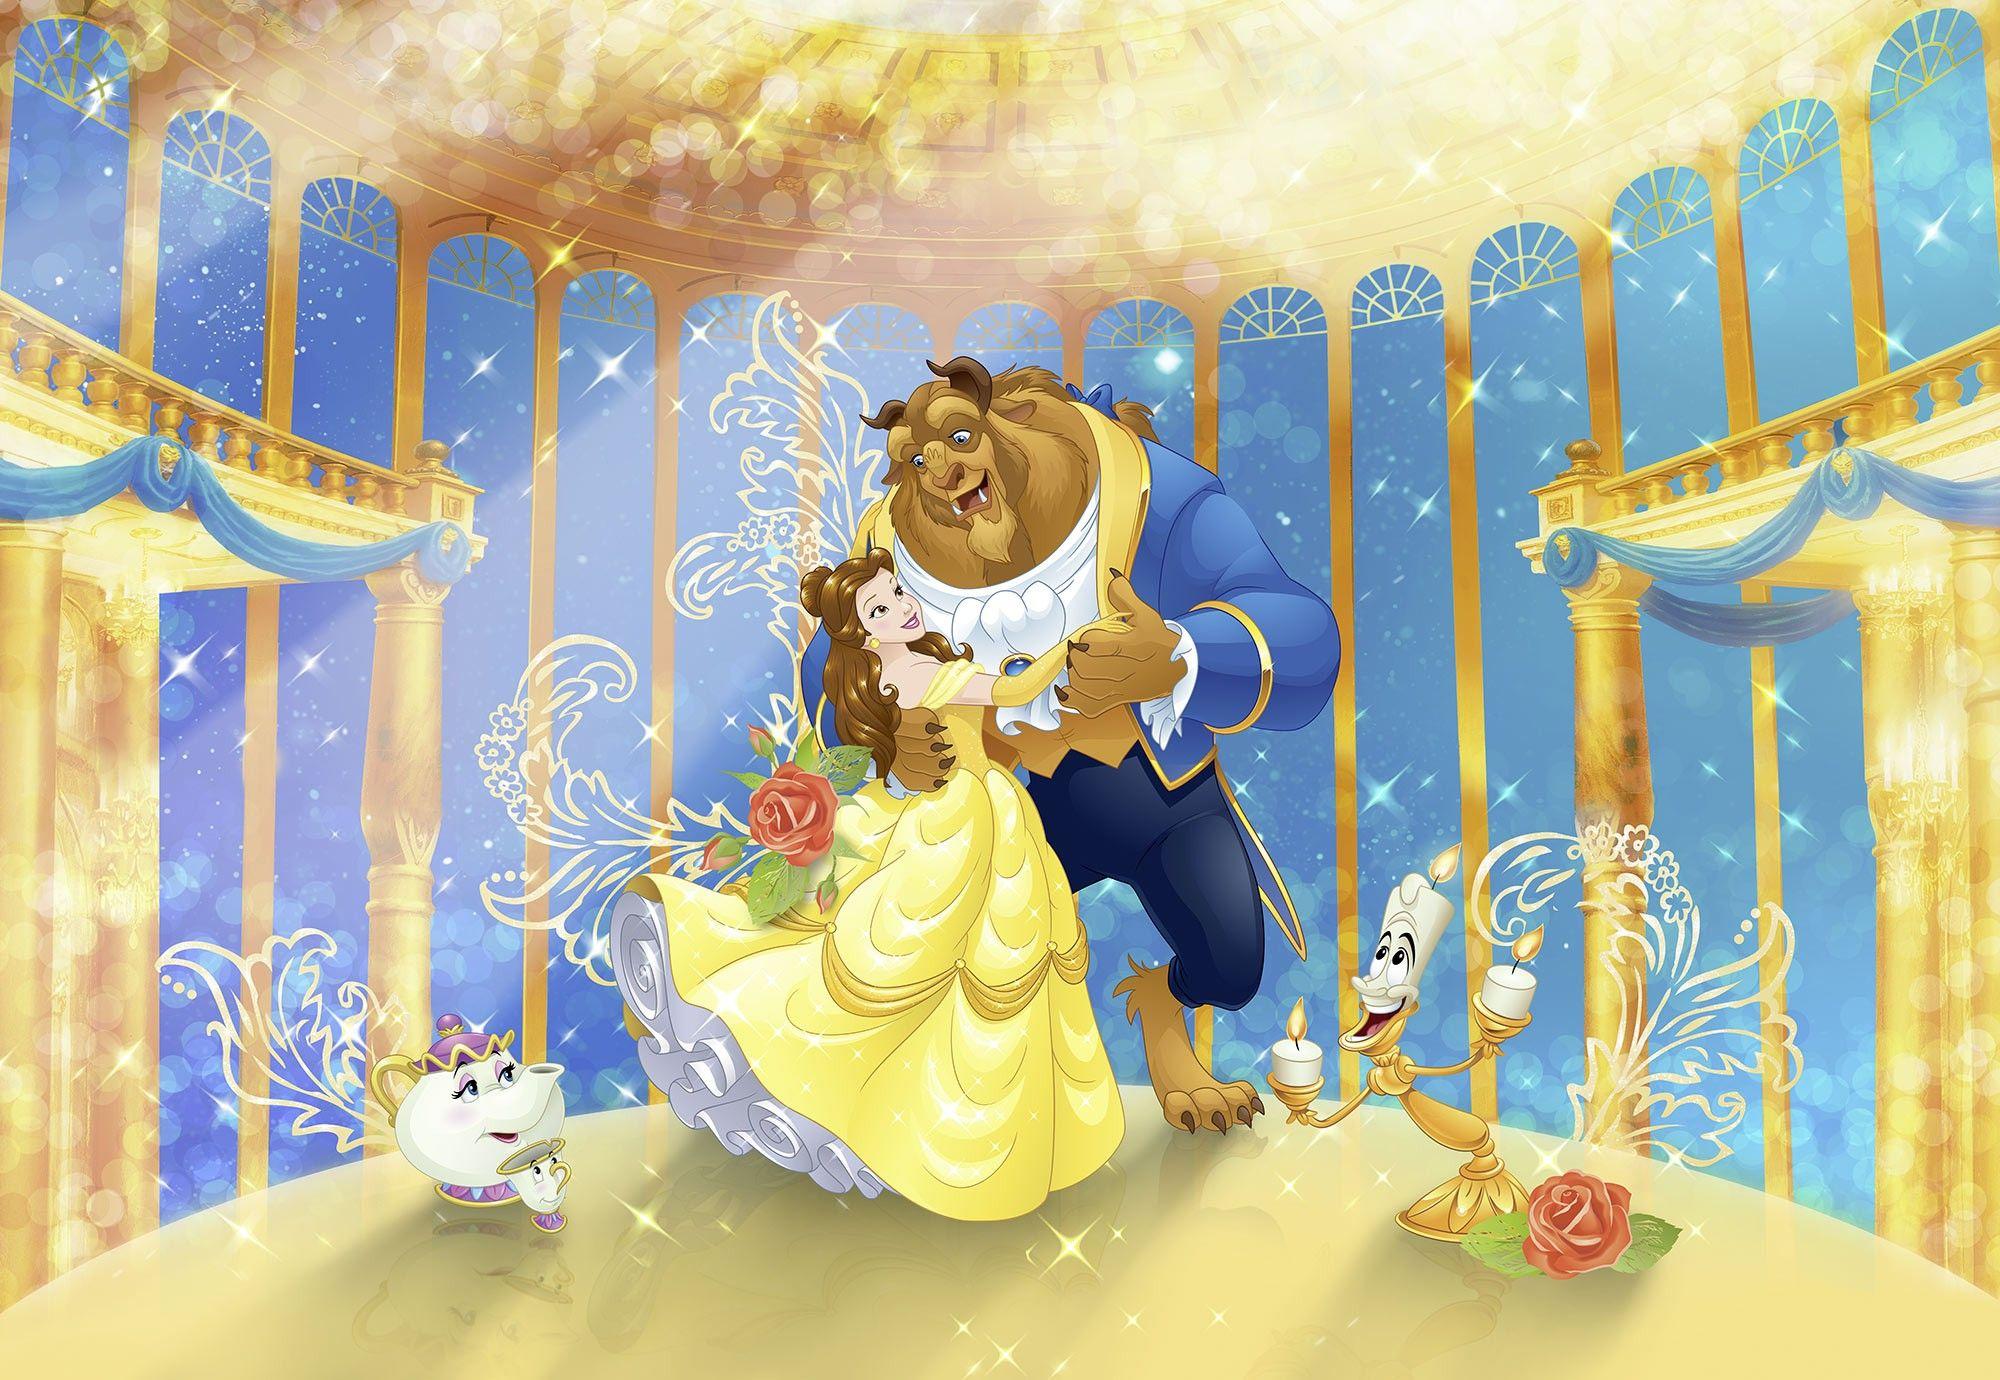 Disney Wallpapers mural for children's bedroom Beauty and the Beast